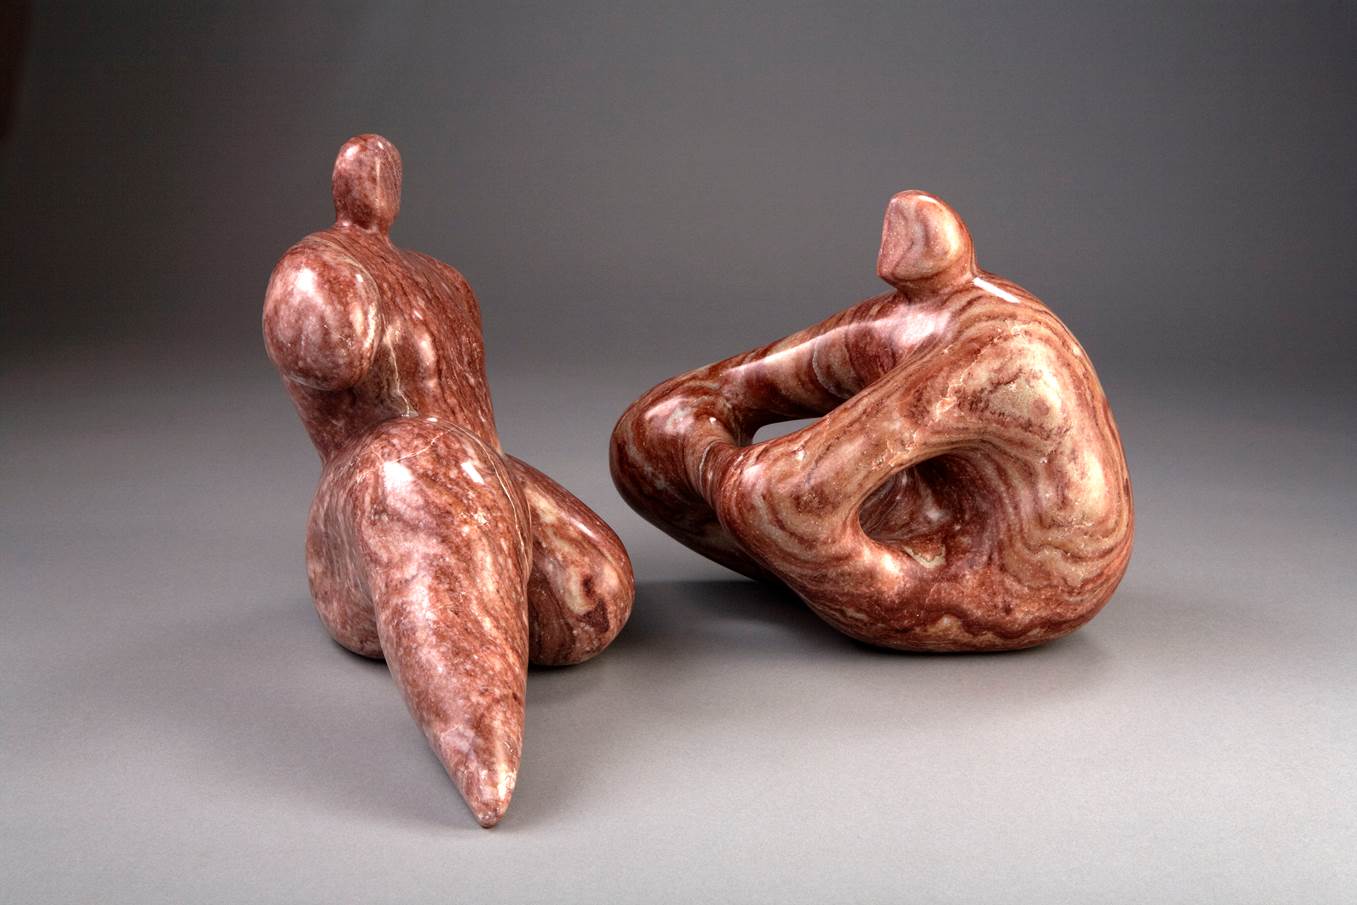 Two small stone sculptures of people